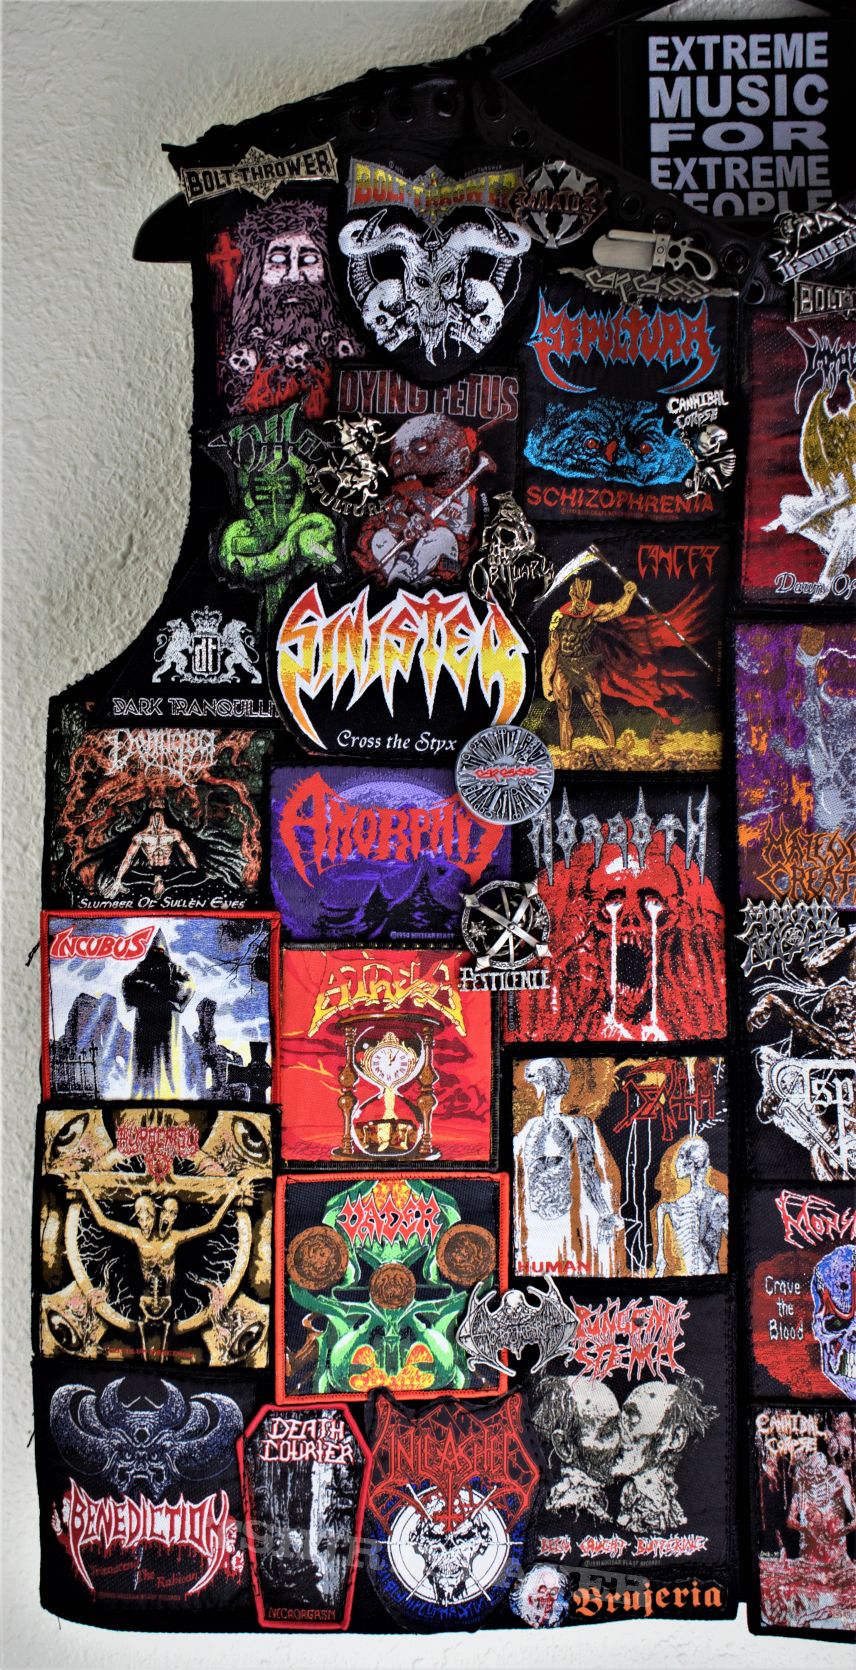 Bolt Thrower death metal vest update some pins and patches ...